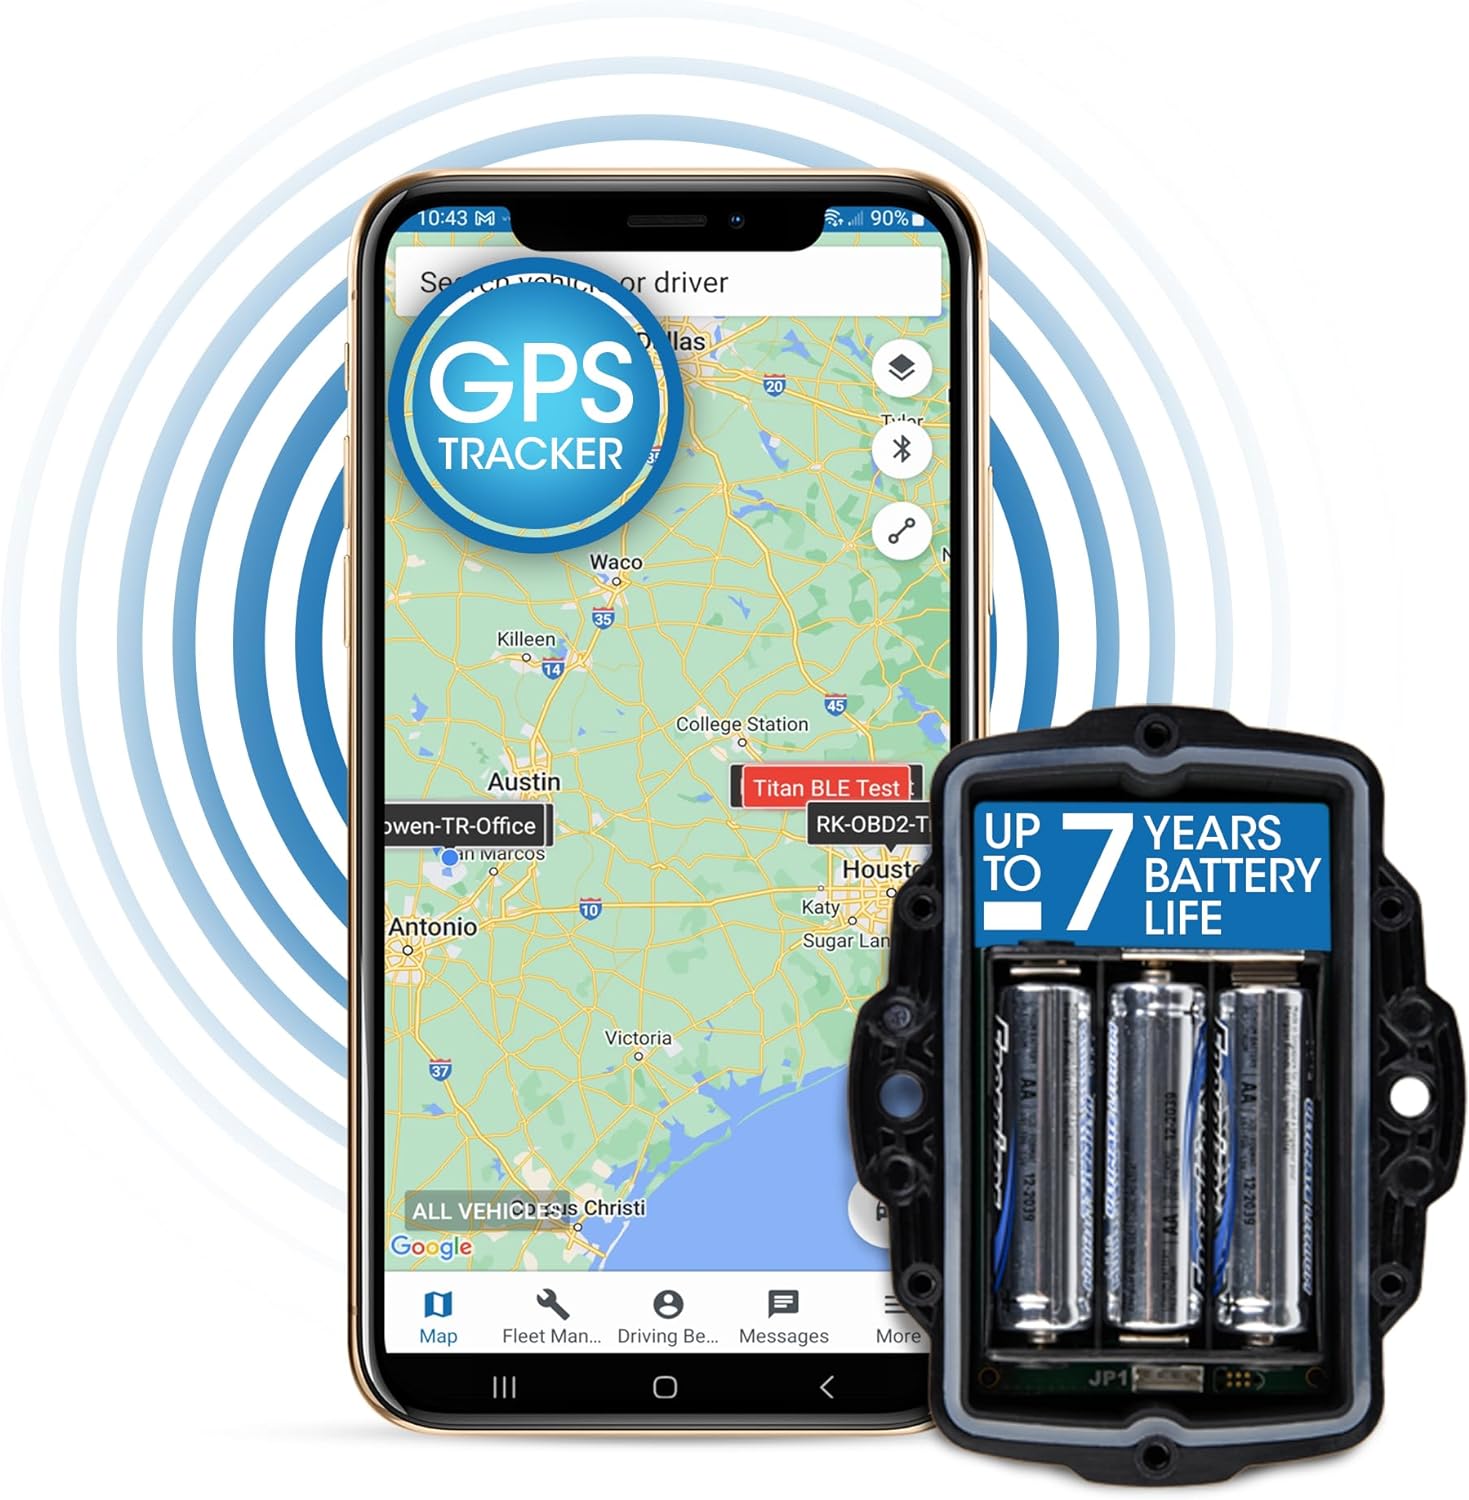 Trak-4 GPS Tracker for Tracking Assets, Equipment, and Vehicles. Email &  Text Alerts. Subscription Required.